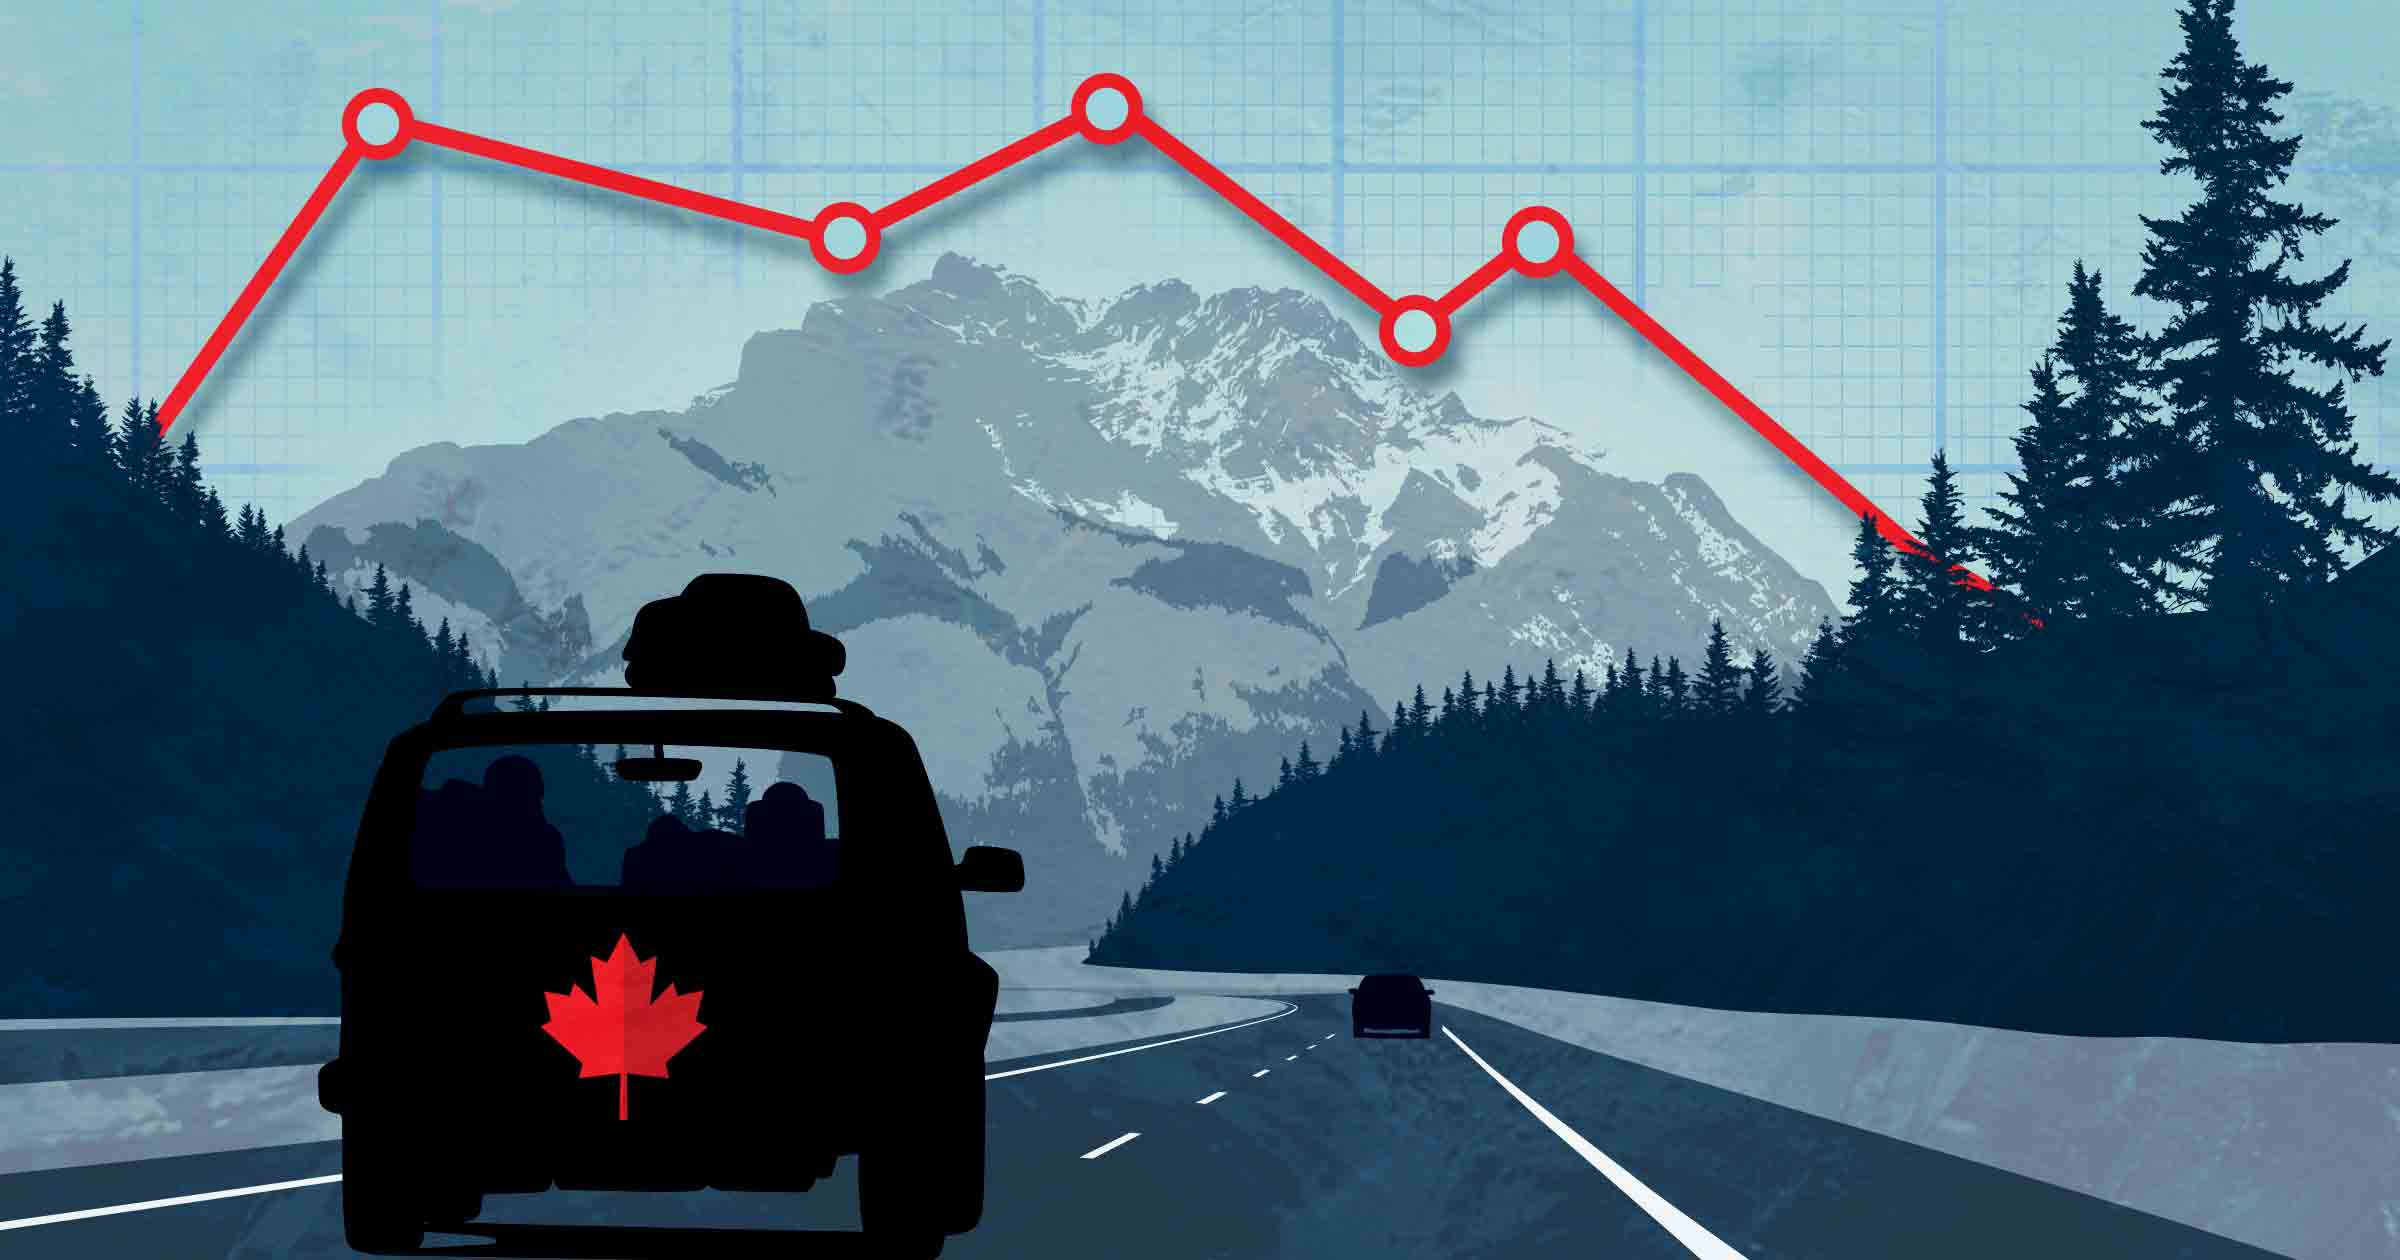 For Canadian tourism, Canadians matter most